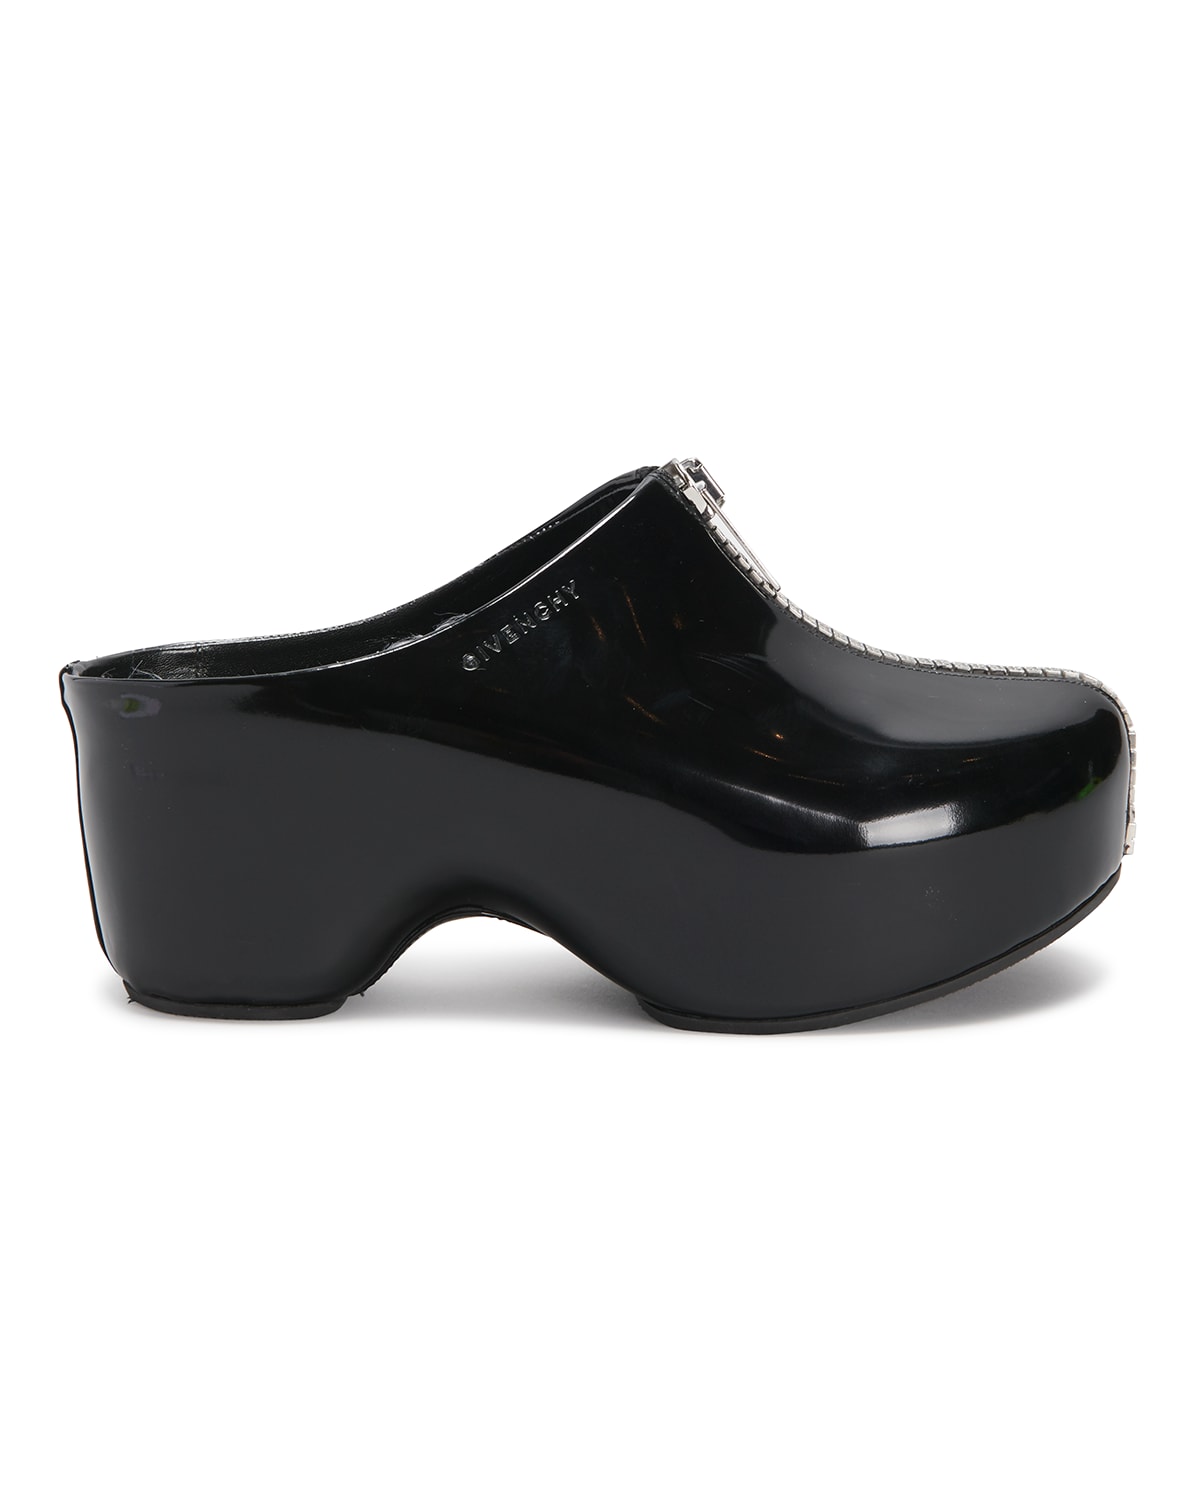 Givenchy G Patent Zip-Up Mule Clogs